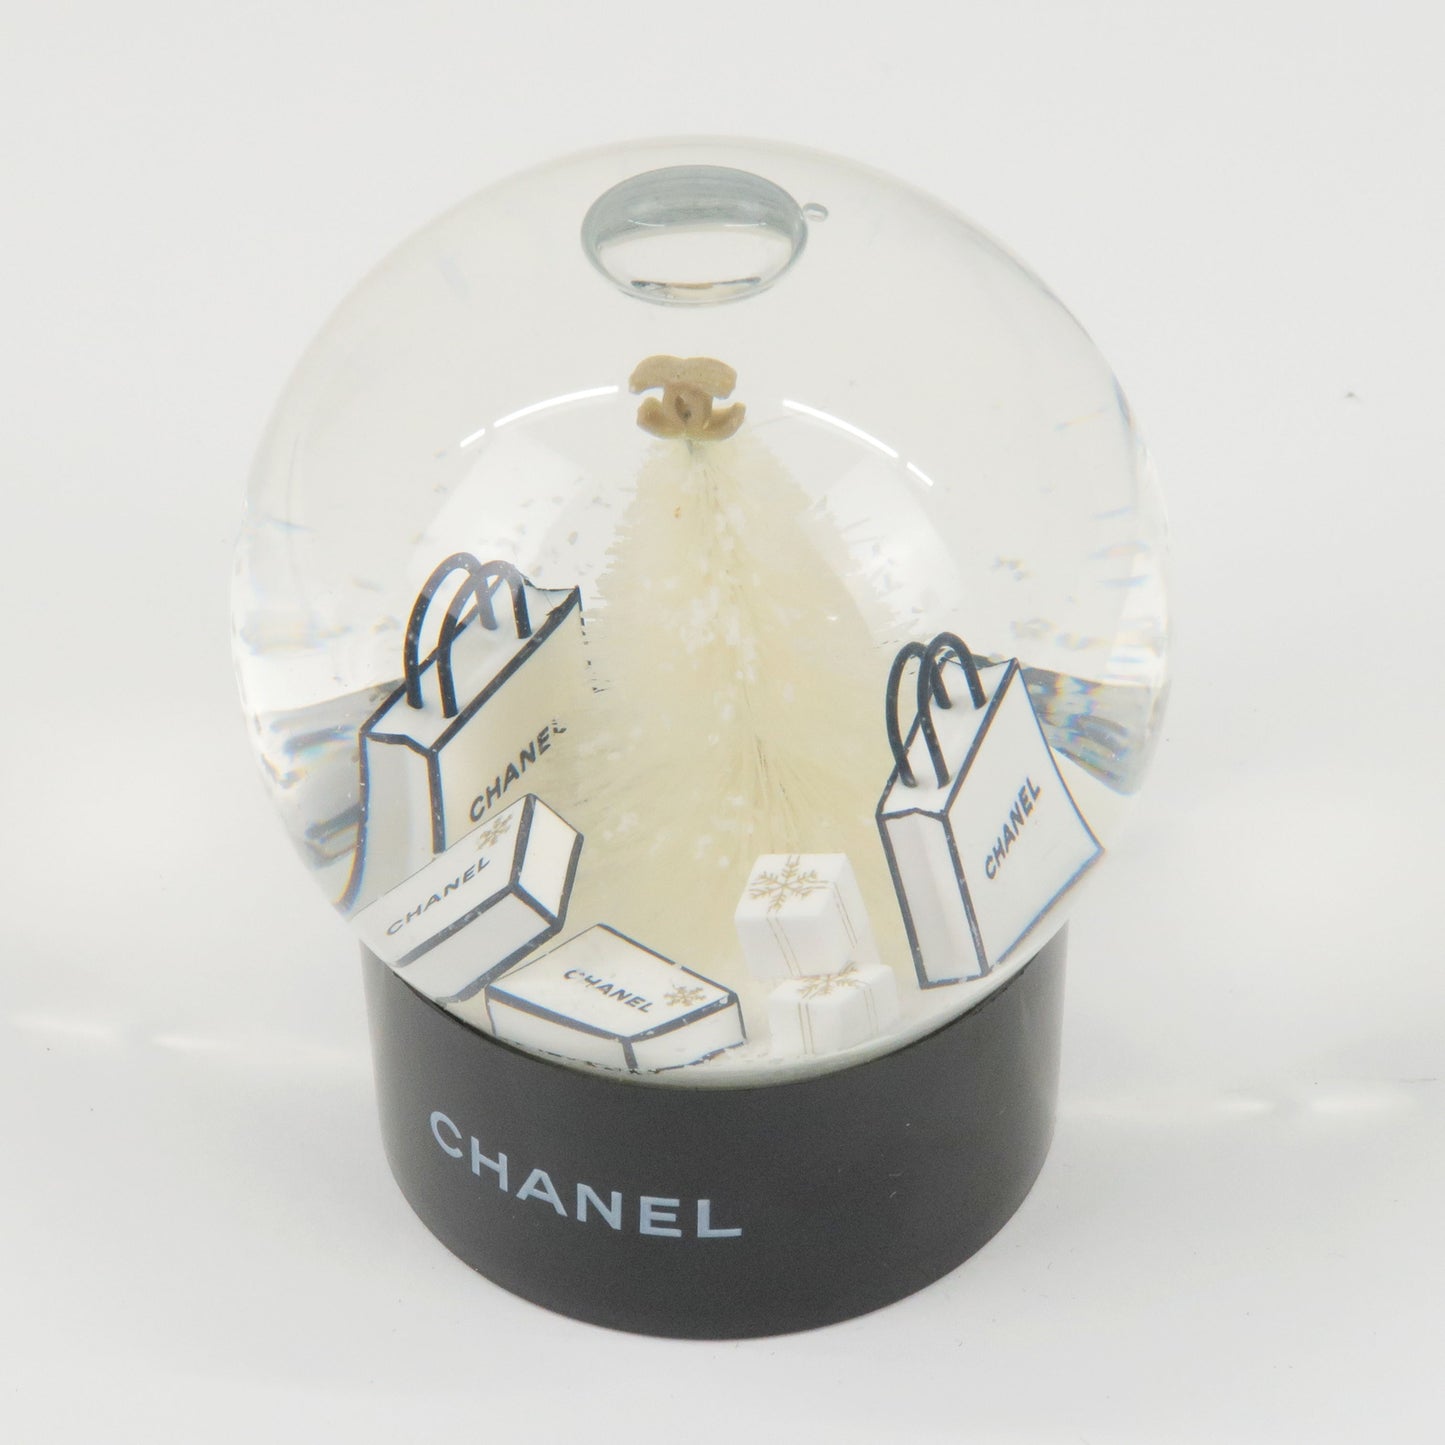 CHANEL Snow Globe 2012 Novelty Brand Accessory Collection